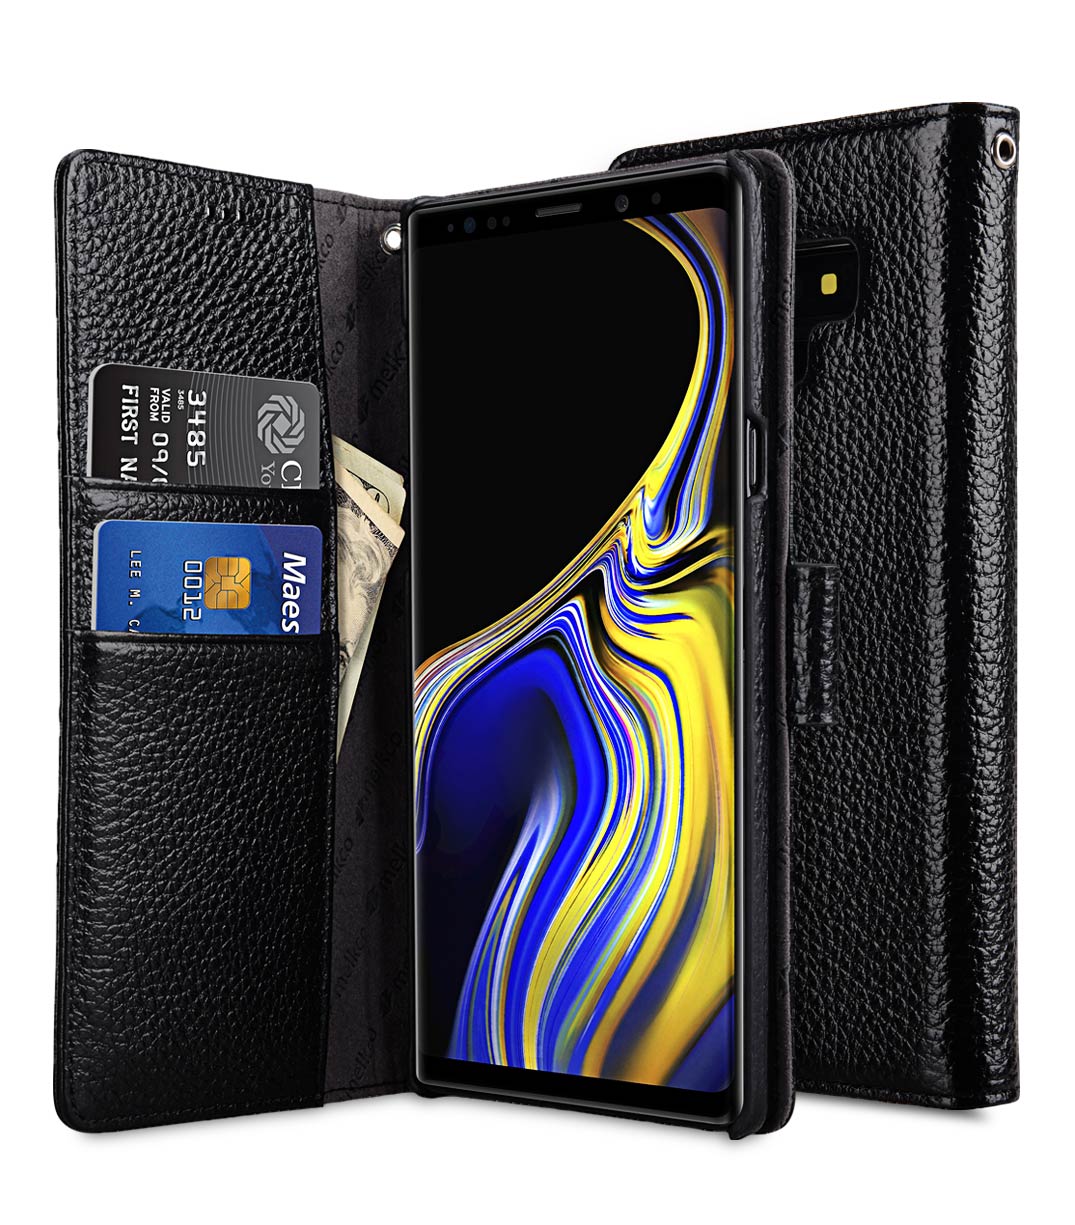 Premium Leather Case for Samsung Galaxy Note 9 - Wallet Book Type